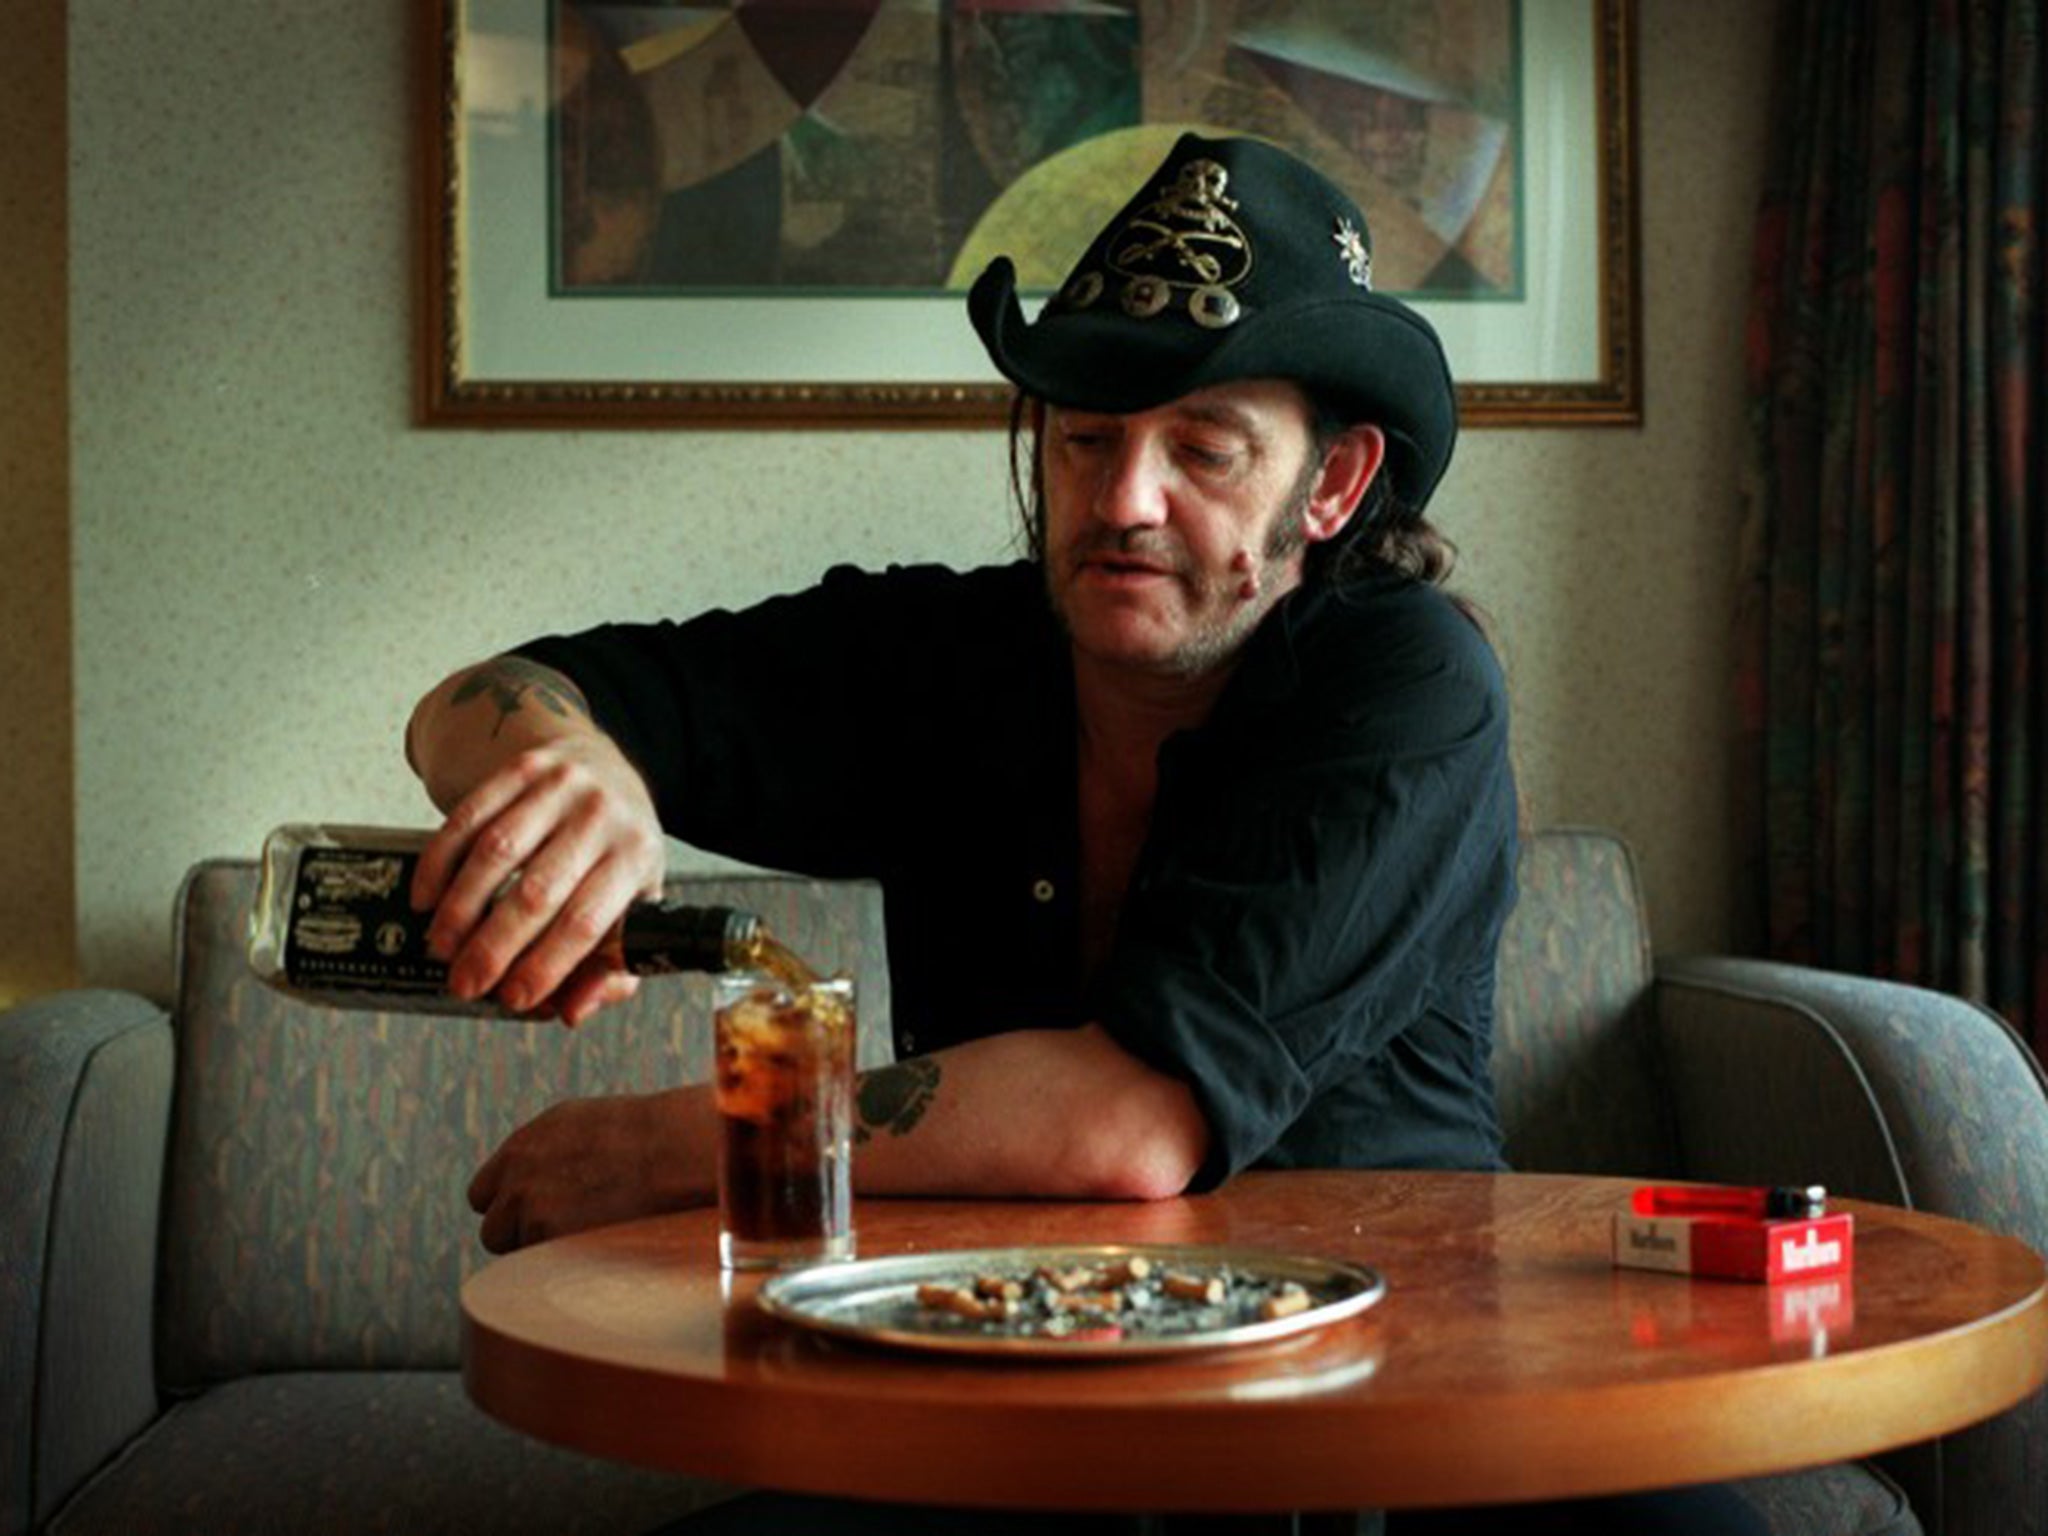 Lemmy pictured in 2000